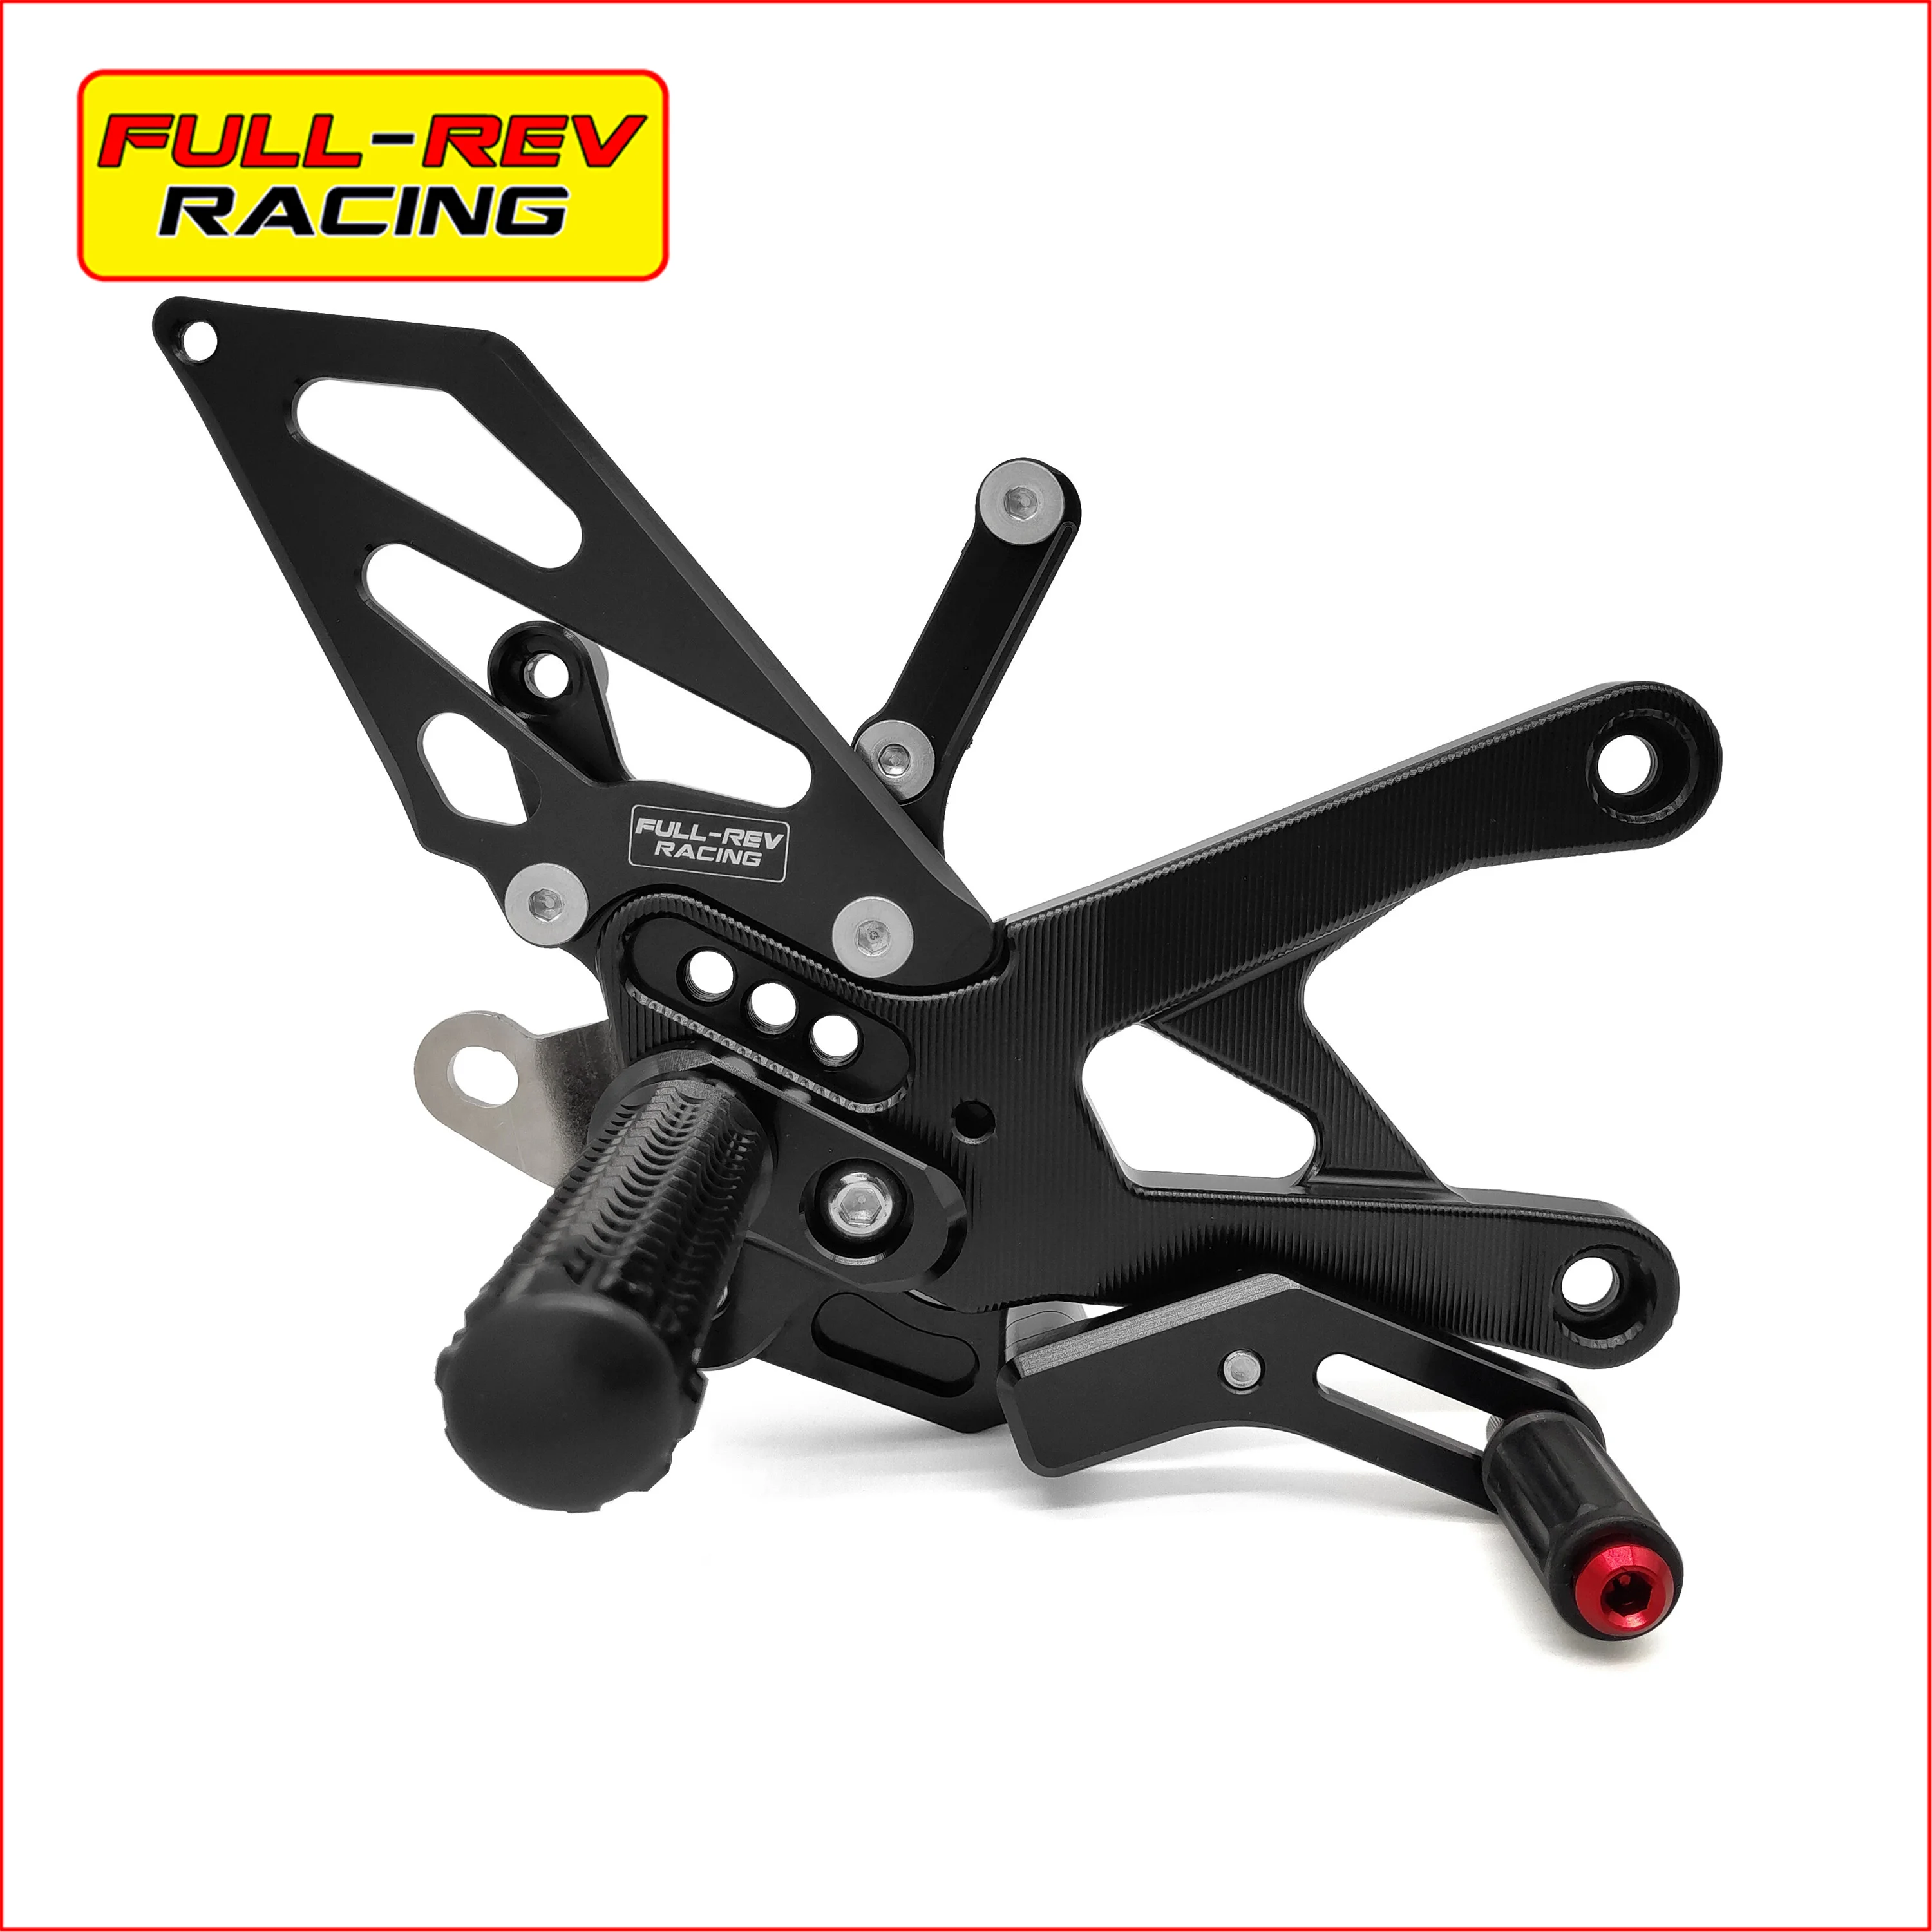 

For YAMAHA YZF-R1(Racing) 2015 2016 2017 2018 2019 REARSETS Motorcycle Rearset Footpegs Full Rev Racing Motorcycle Accessories